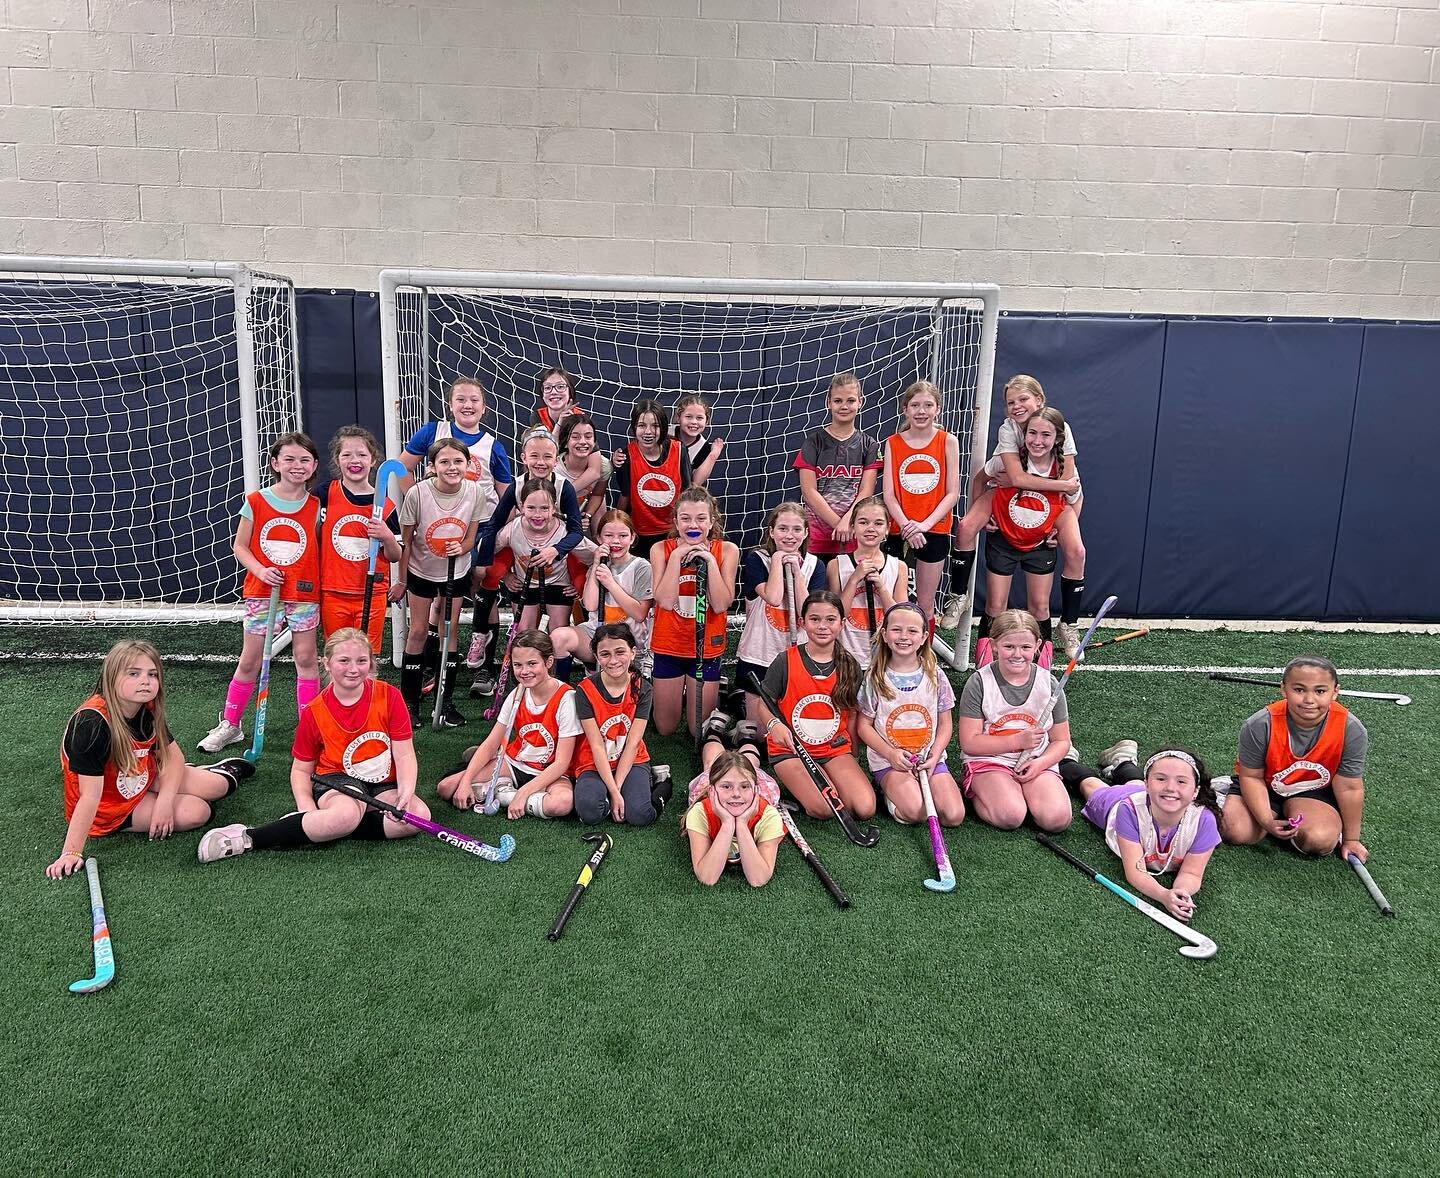 We love field hockey! 🏑🧡🧡

Last day with our youth group! We saw lots of growth with each player!! Looking forward to the next session 🧡